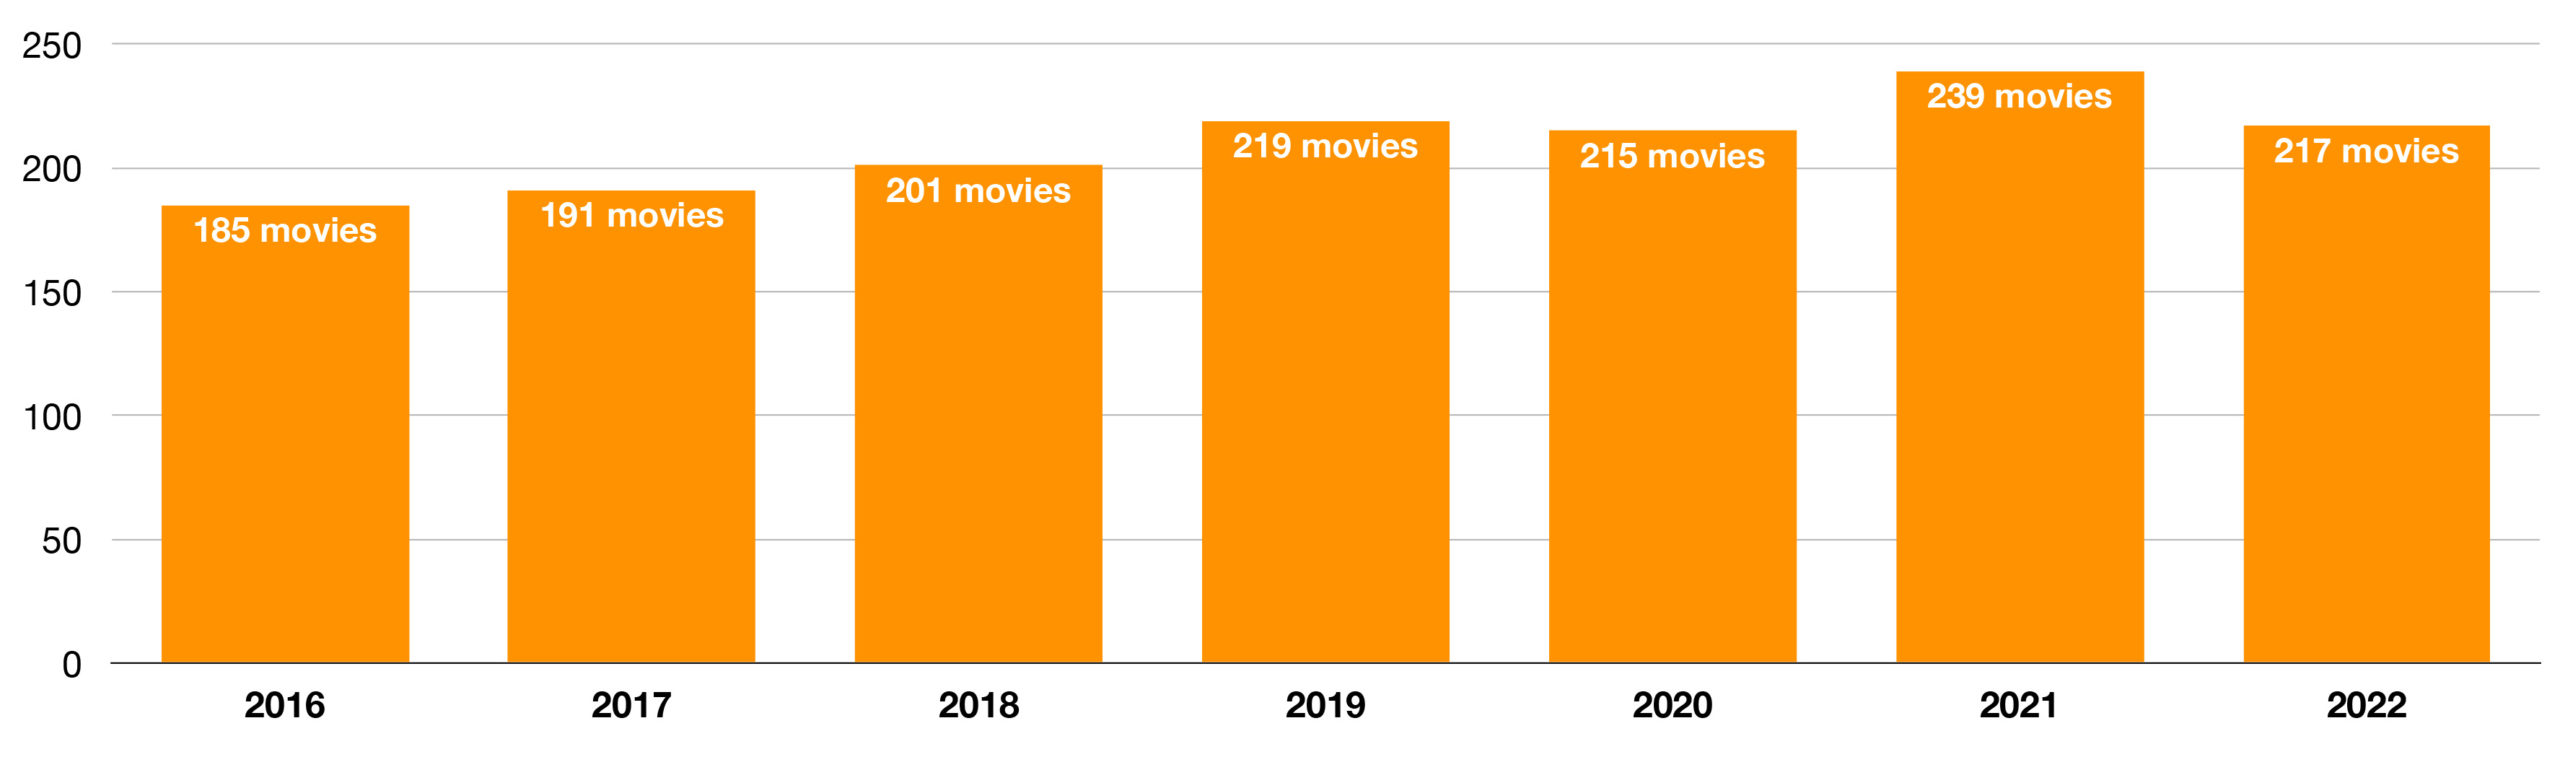 Total Movies Watched by Year, 2022